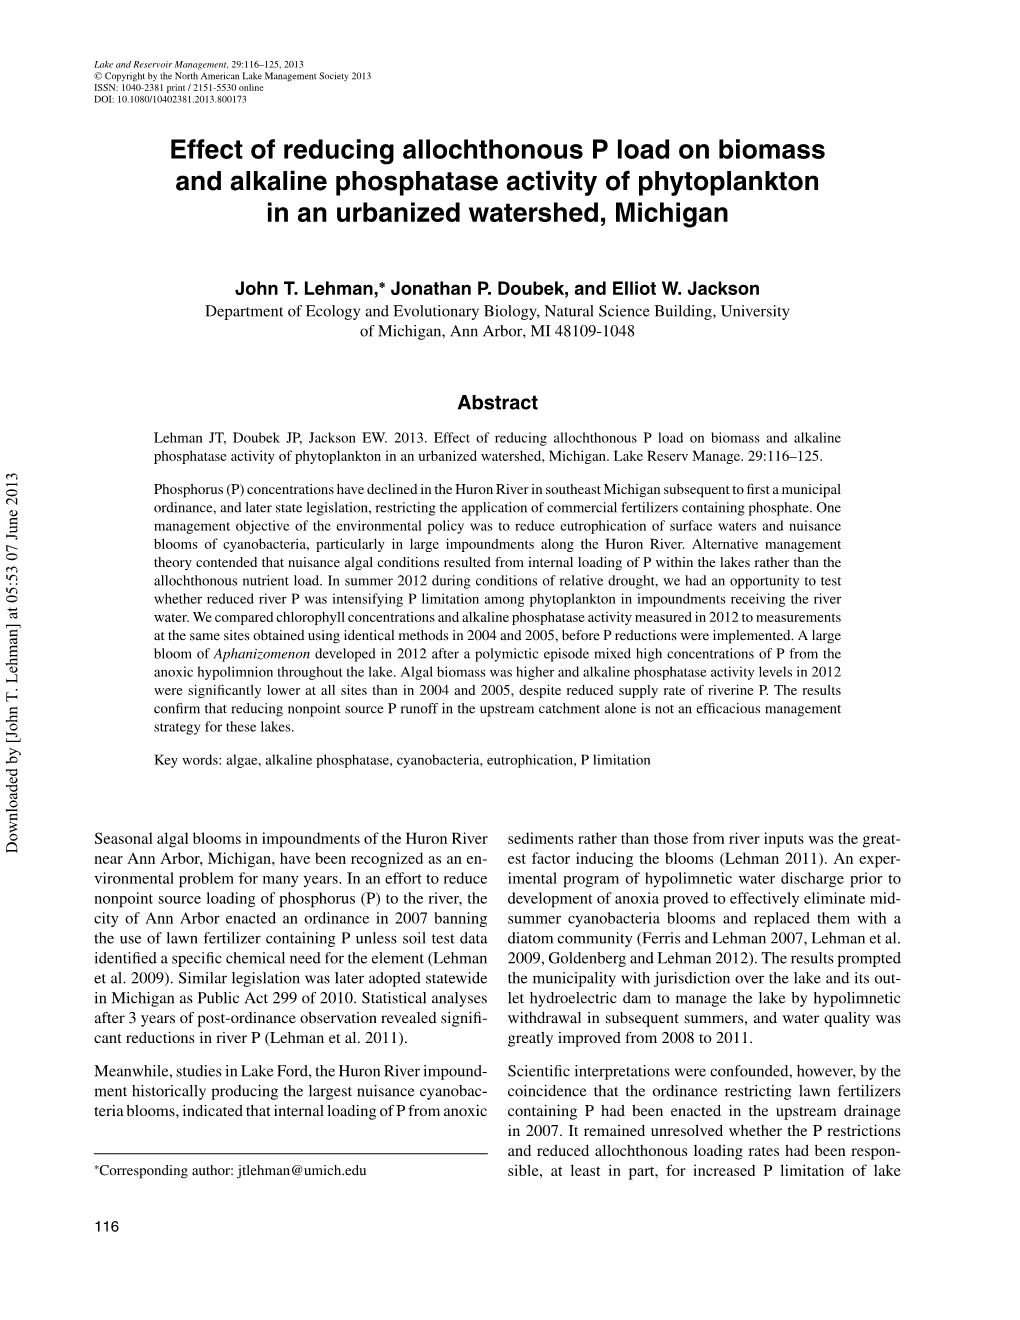 Effect of Reducing Allochthonous P Load on Biomass and Alkaline Phosphatase Activity of Phytoplankton in an Urbanized Watershed, Michigan